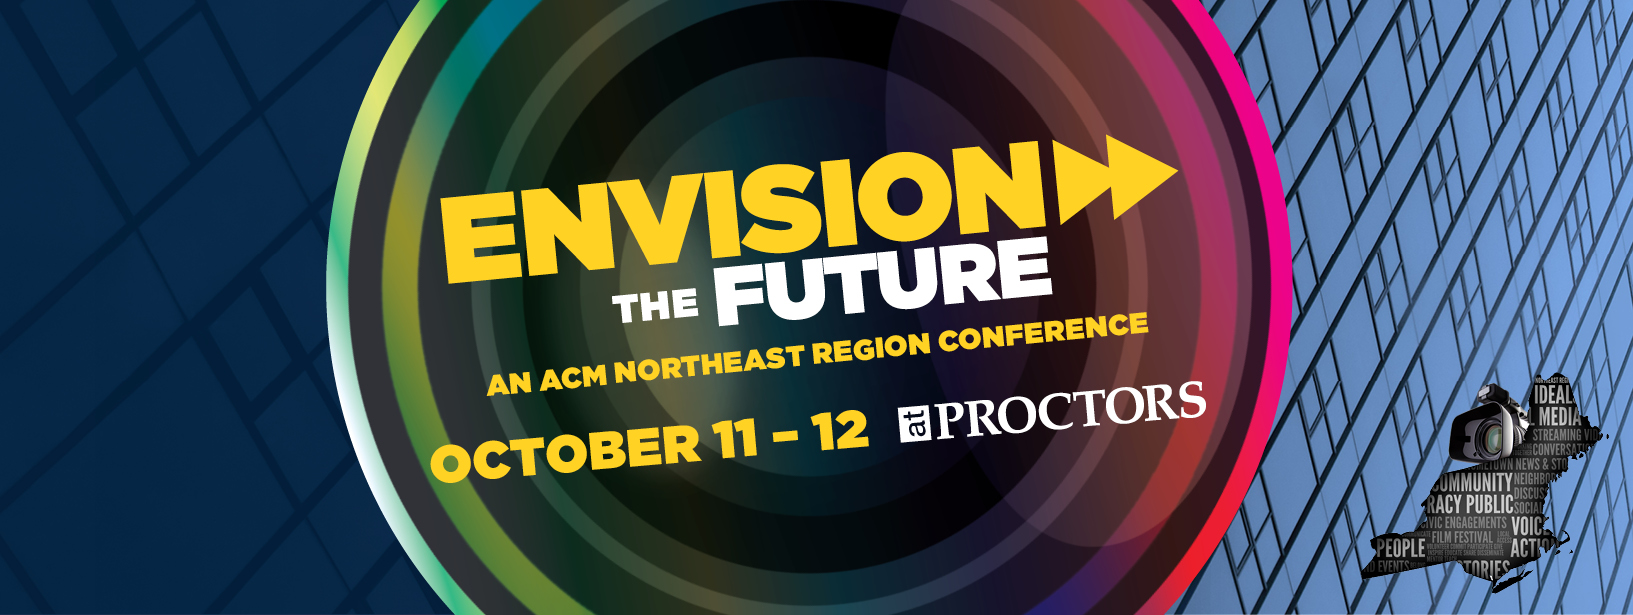 Thank you for attending the Envision the Future Conference! ACMNE